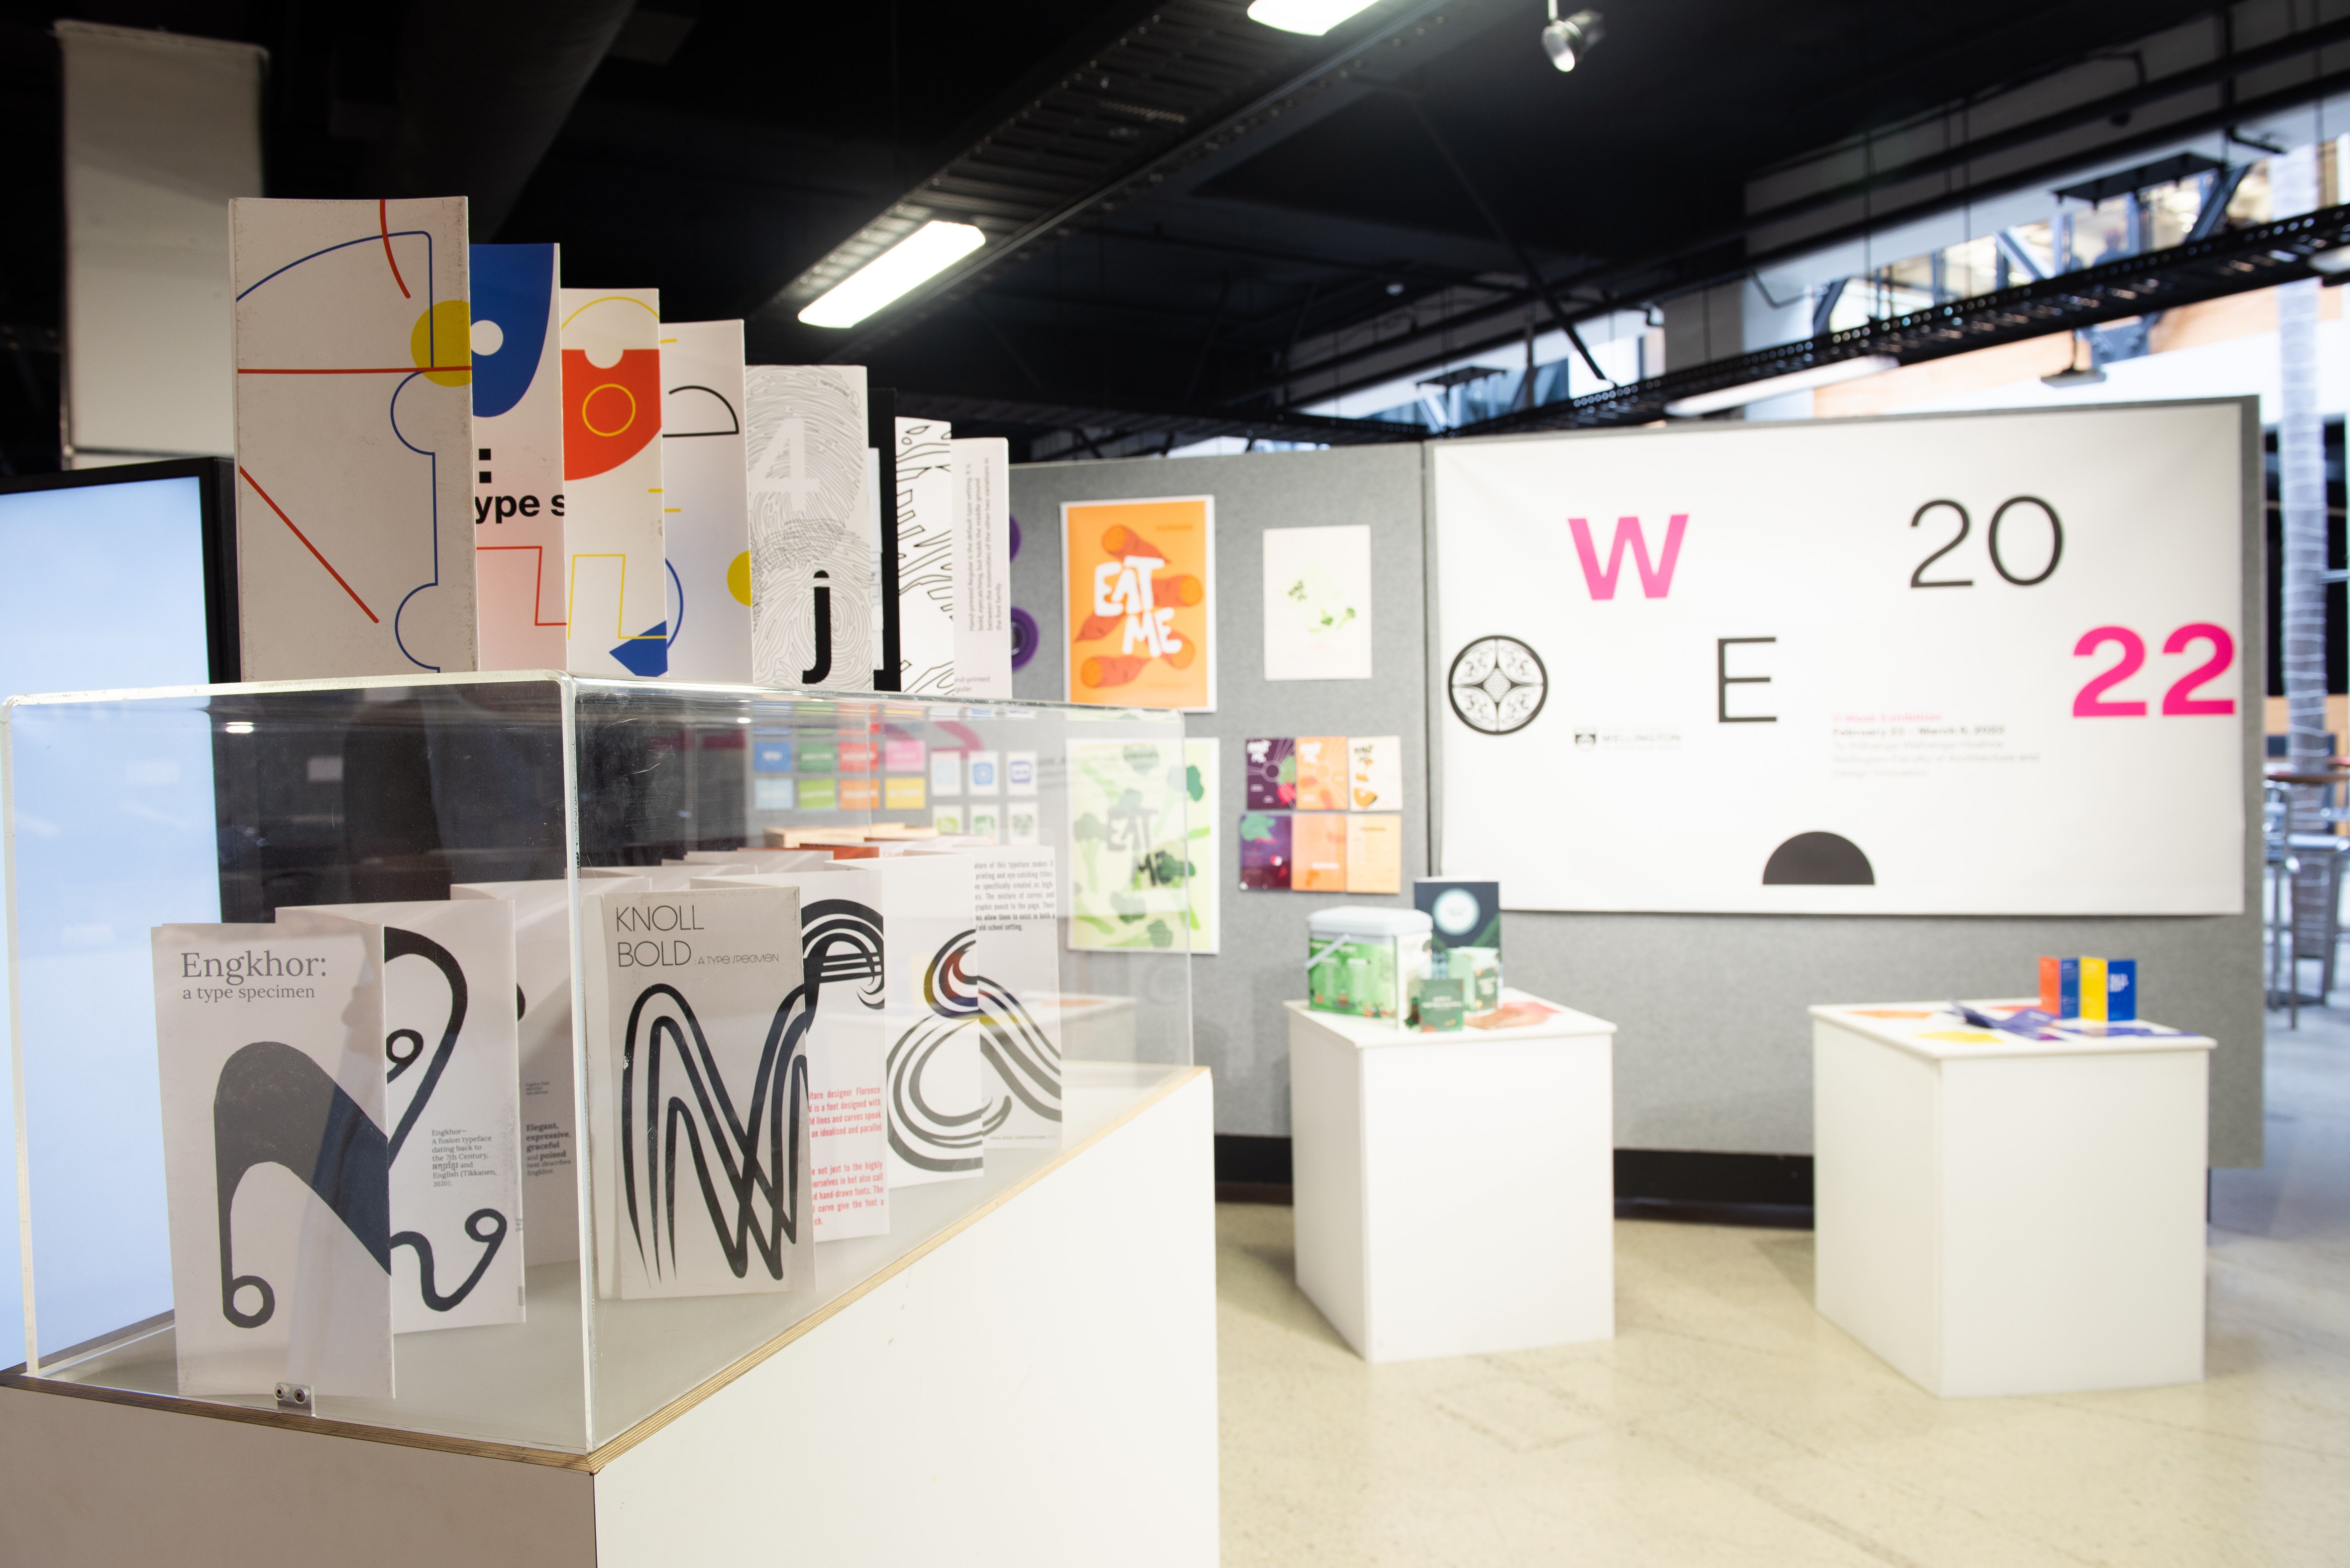 image of the exhibition with the OWE branding banner 